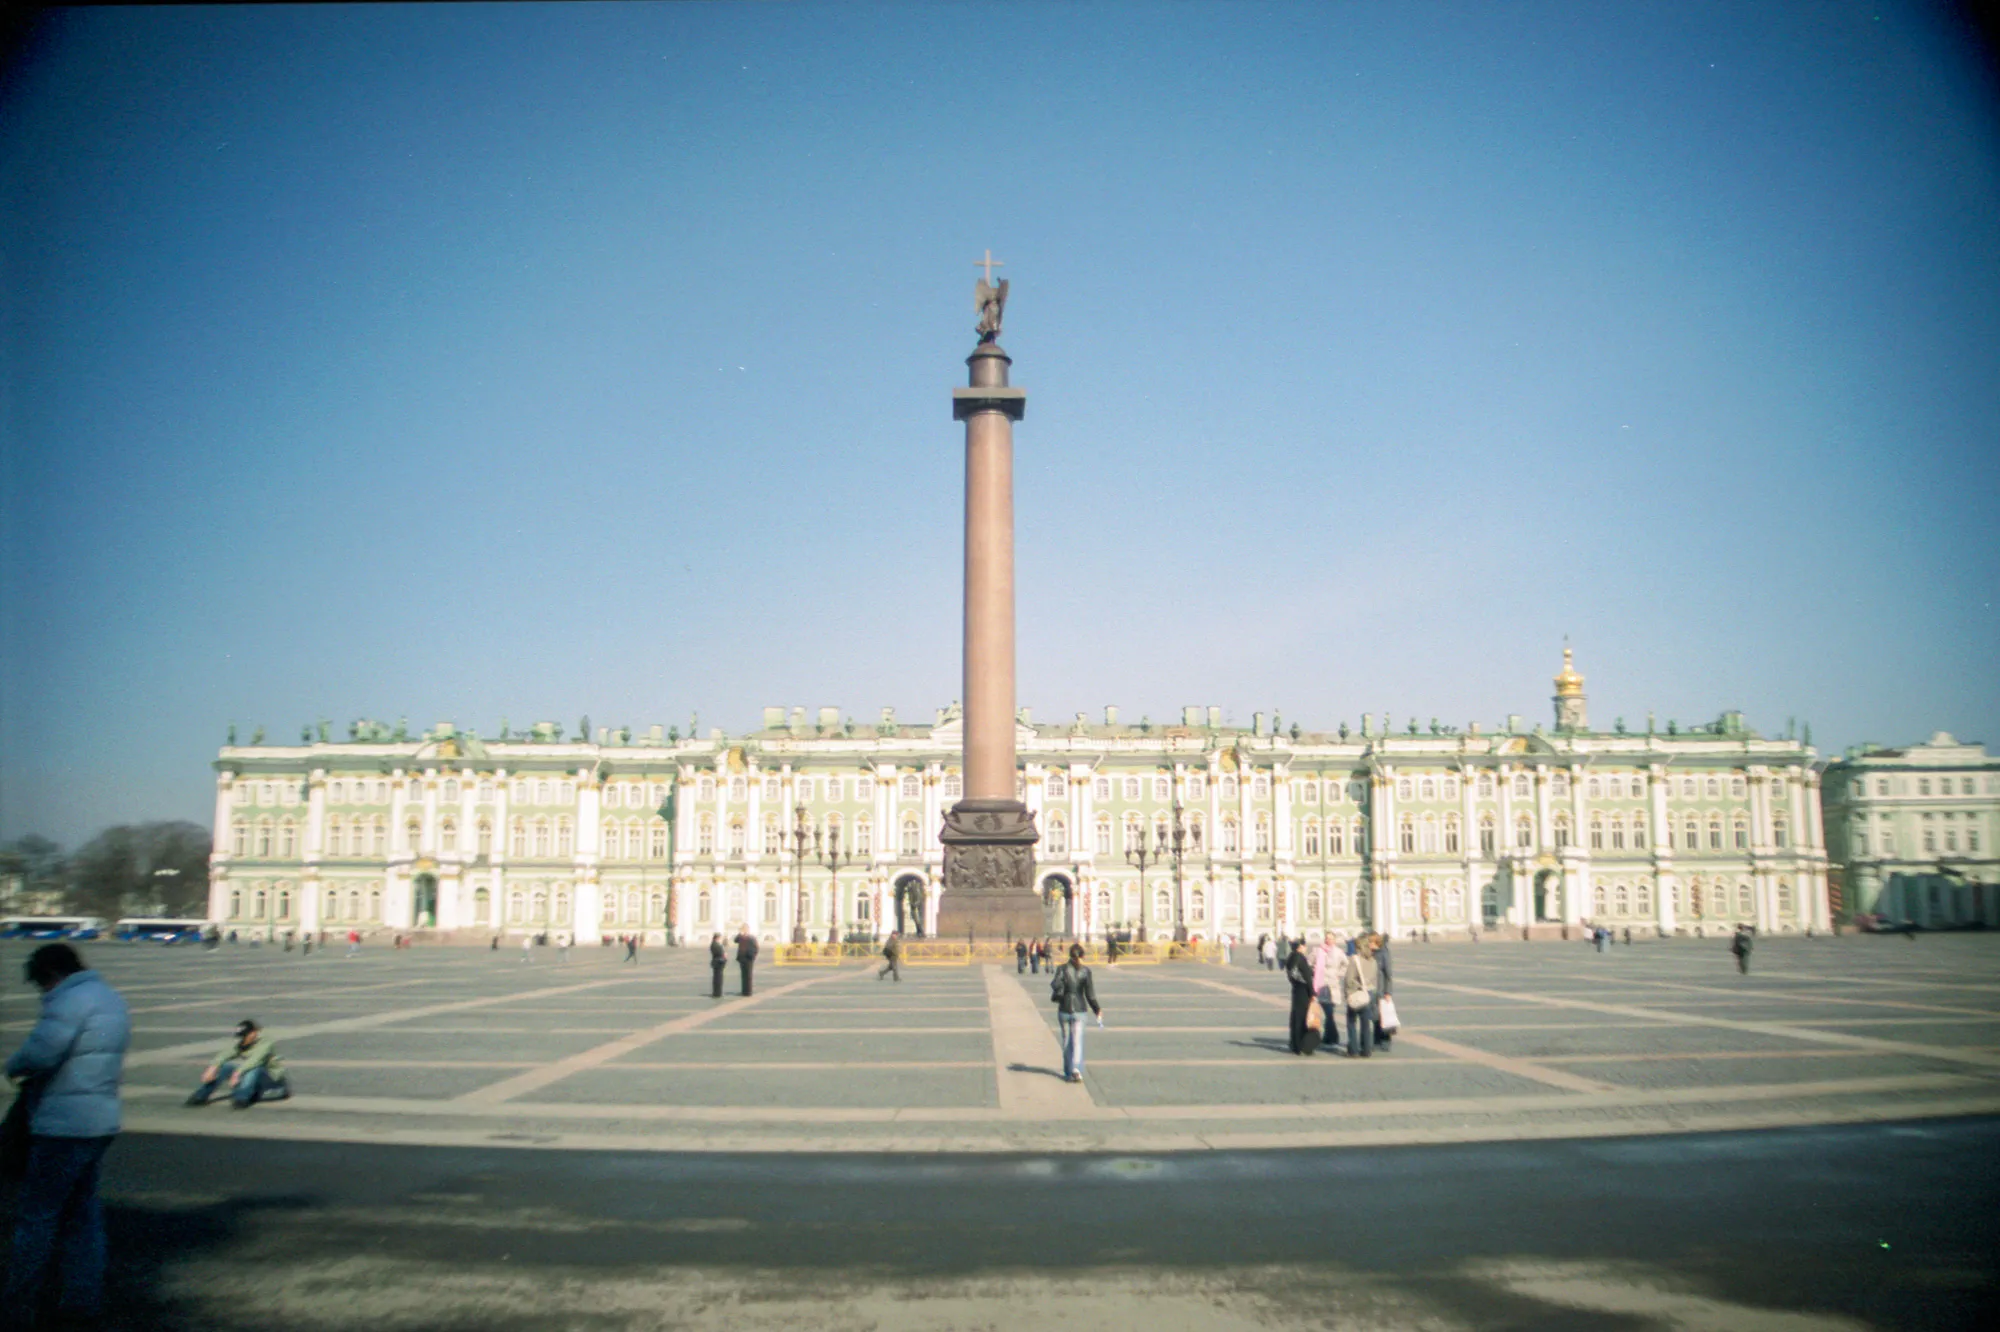 Palace Square and Alexander Column